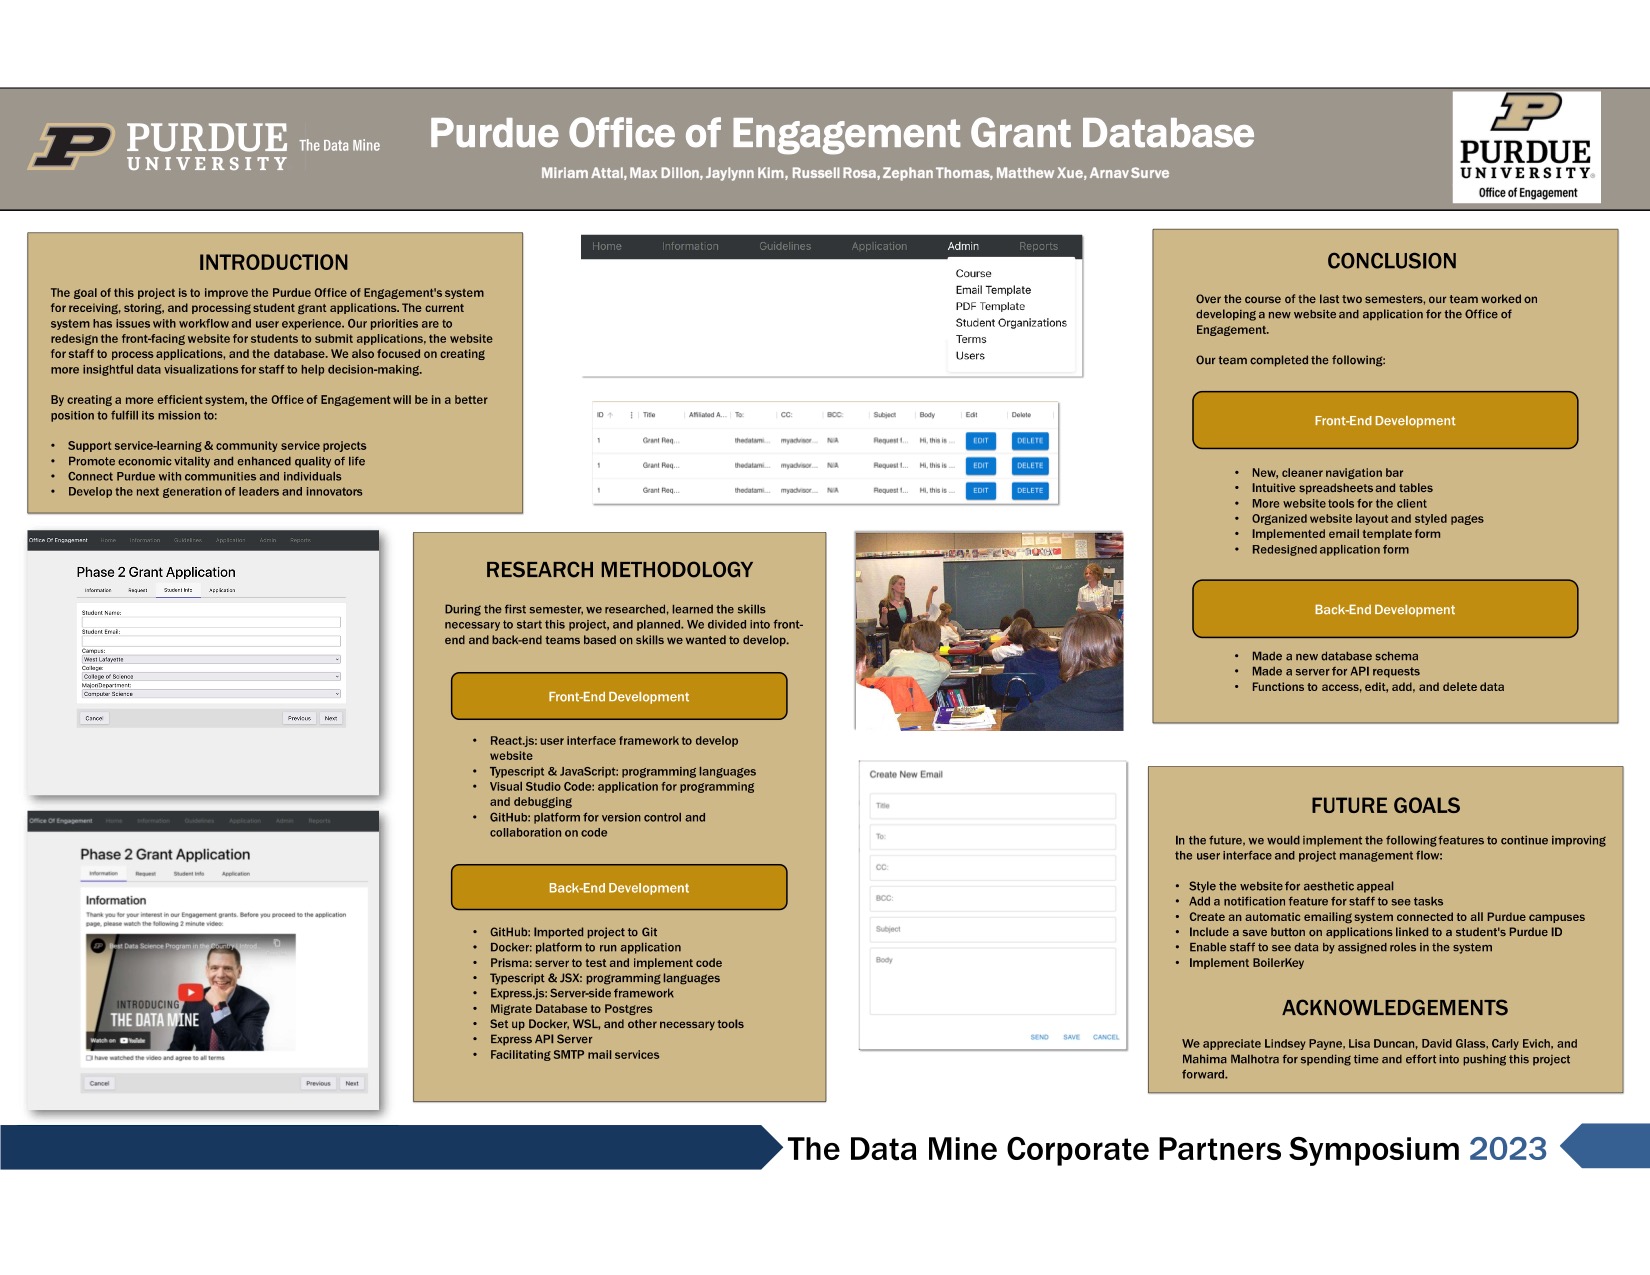 TDM 2023 Purdue Office of Engagement Poster